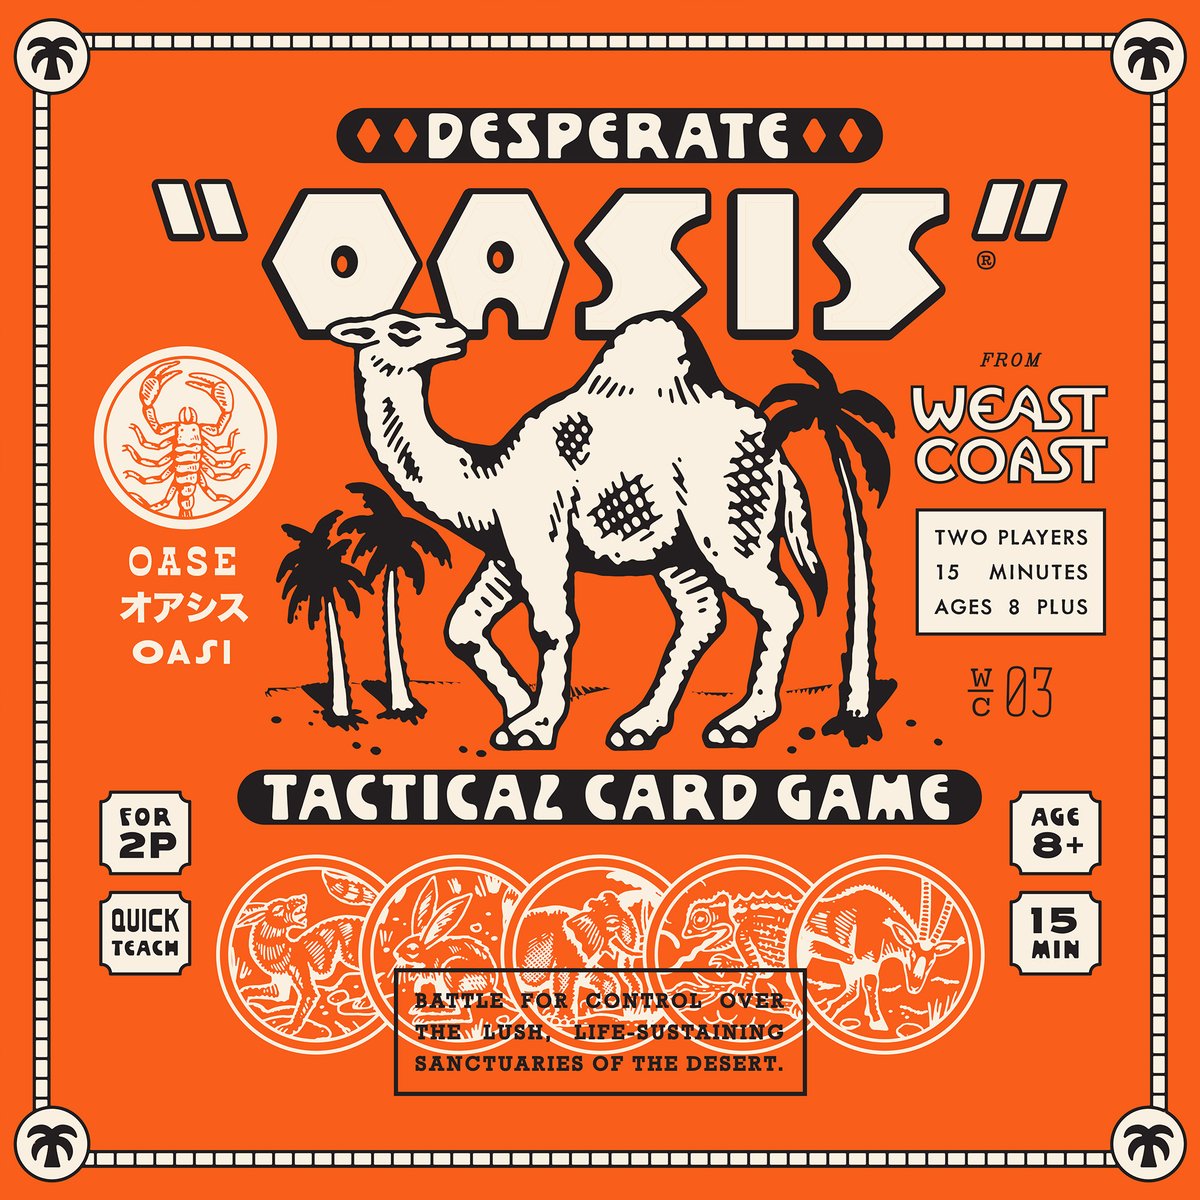 DESPERATE OASIS, a small box card game with a big table presence. It's a quick-teach dueling game with clever cardplay, great components, and some really rude scorpions. Games last 15 minutes and the whole game fits in your pocket. I think you'll love it. instagram.com/weastcoaststud…